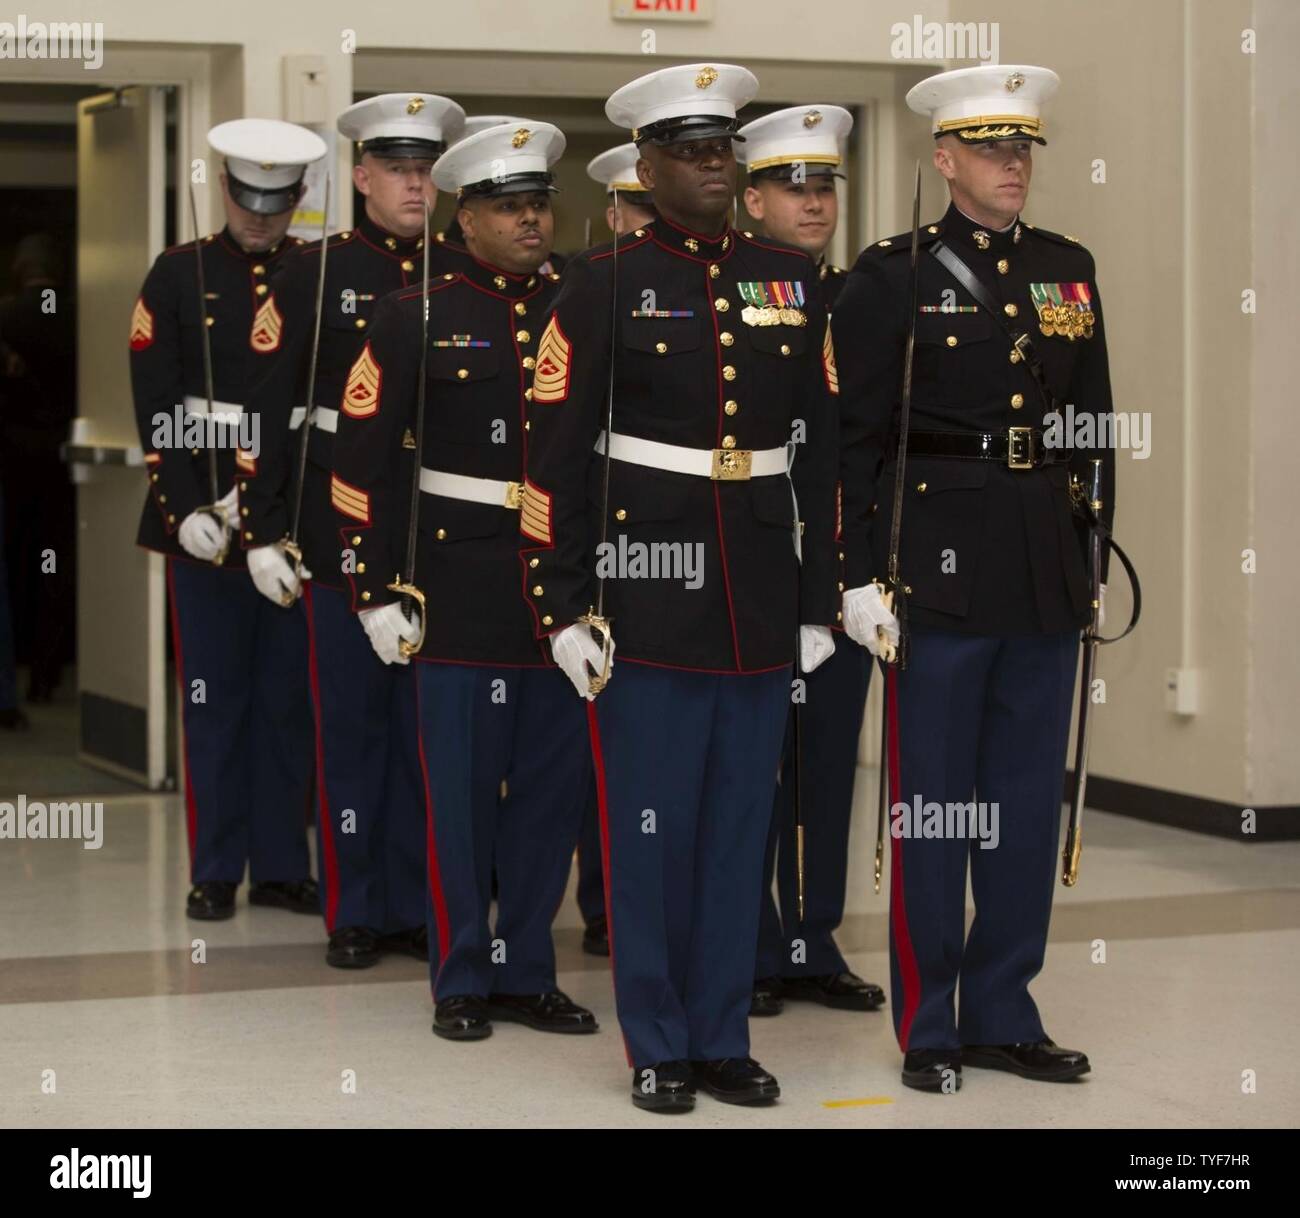 U.S. Marines with Headquarters and Headquarters Squadron (H&HS) stand at attention during presentation of colors at the H&HS Marine Corps Air Station New River 241st Marine Corps Birthday Ball, Crystal Coast Civic Center, Morehead City, N.C., Nov. 5, 2016. The Marine Corps has carred 241 years of traditions, values and standards since its establishment in 1775. Stock Photo